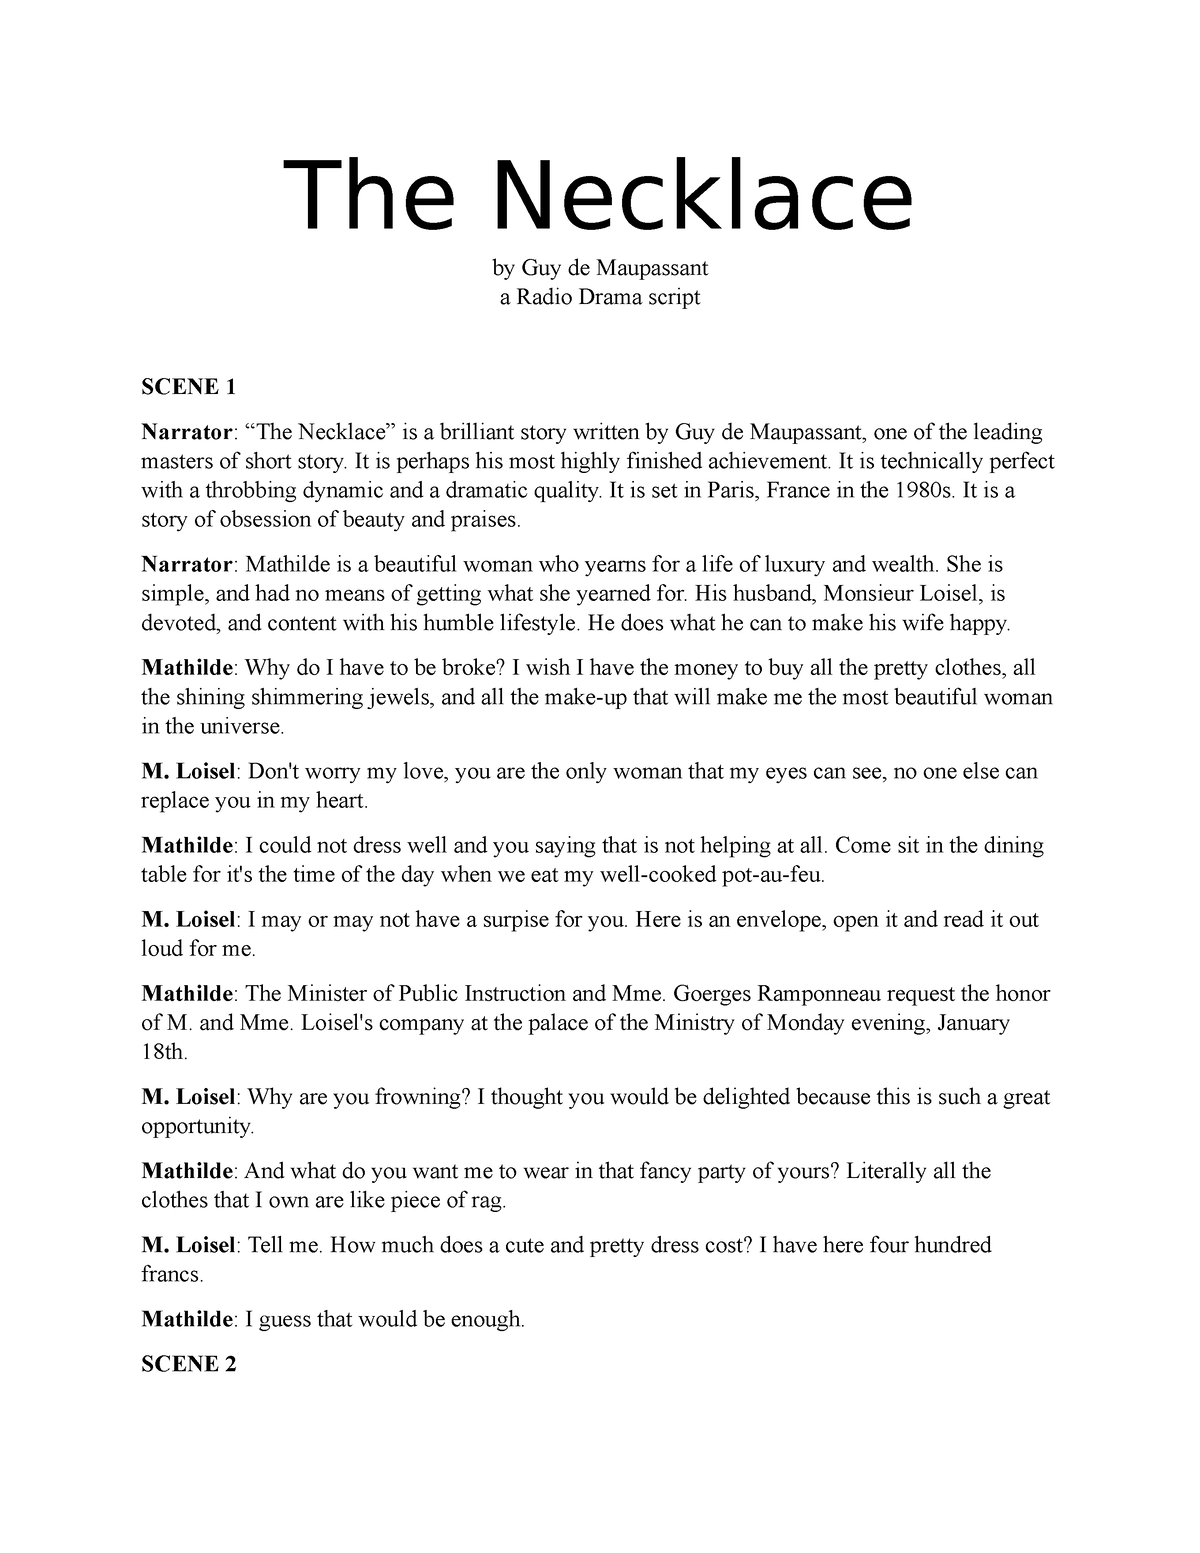 The Necklace Character Analysis Lesson Plan - eNotes.com